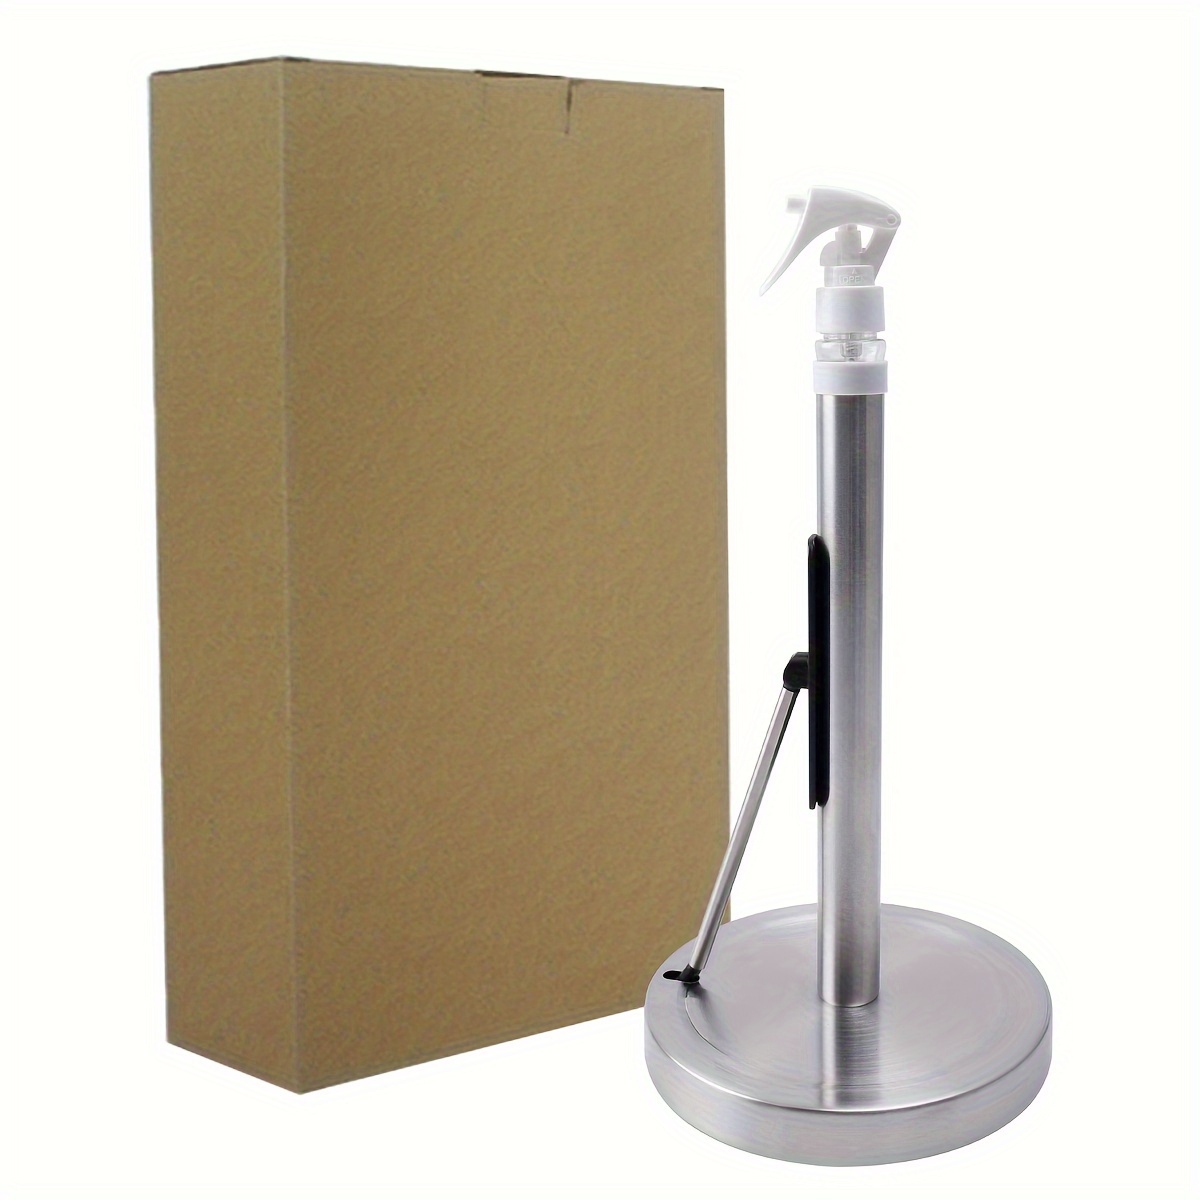 Kitchen Paper Towel Holder with Spray Bottle Stainless Steel Roll